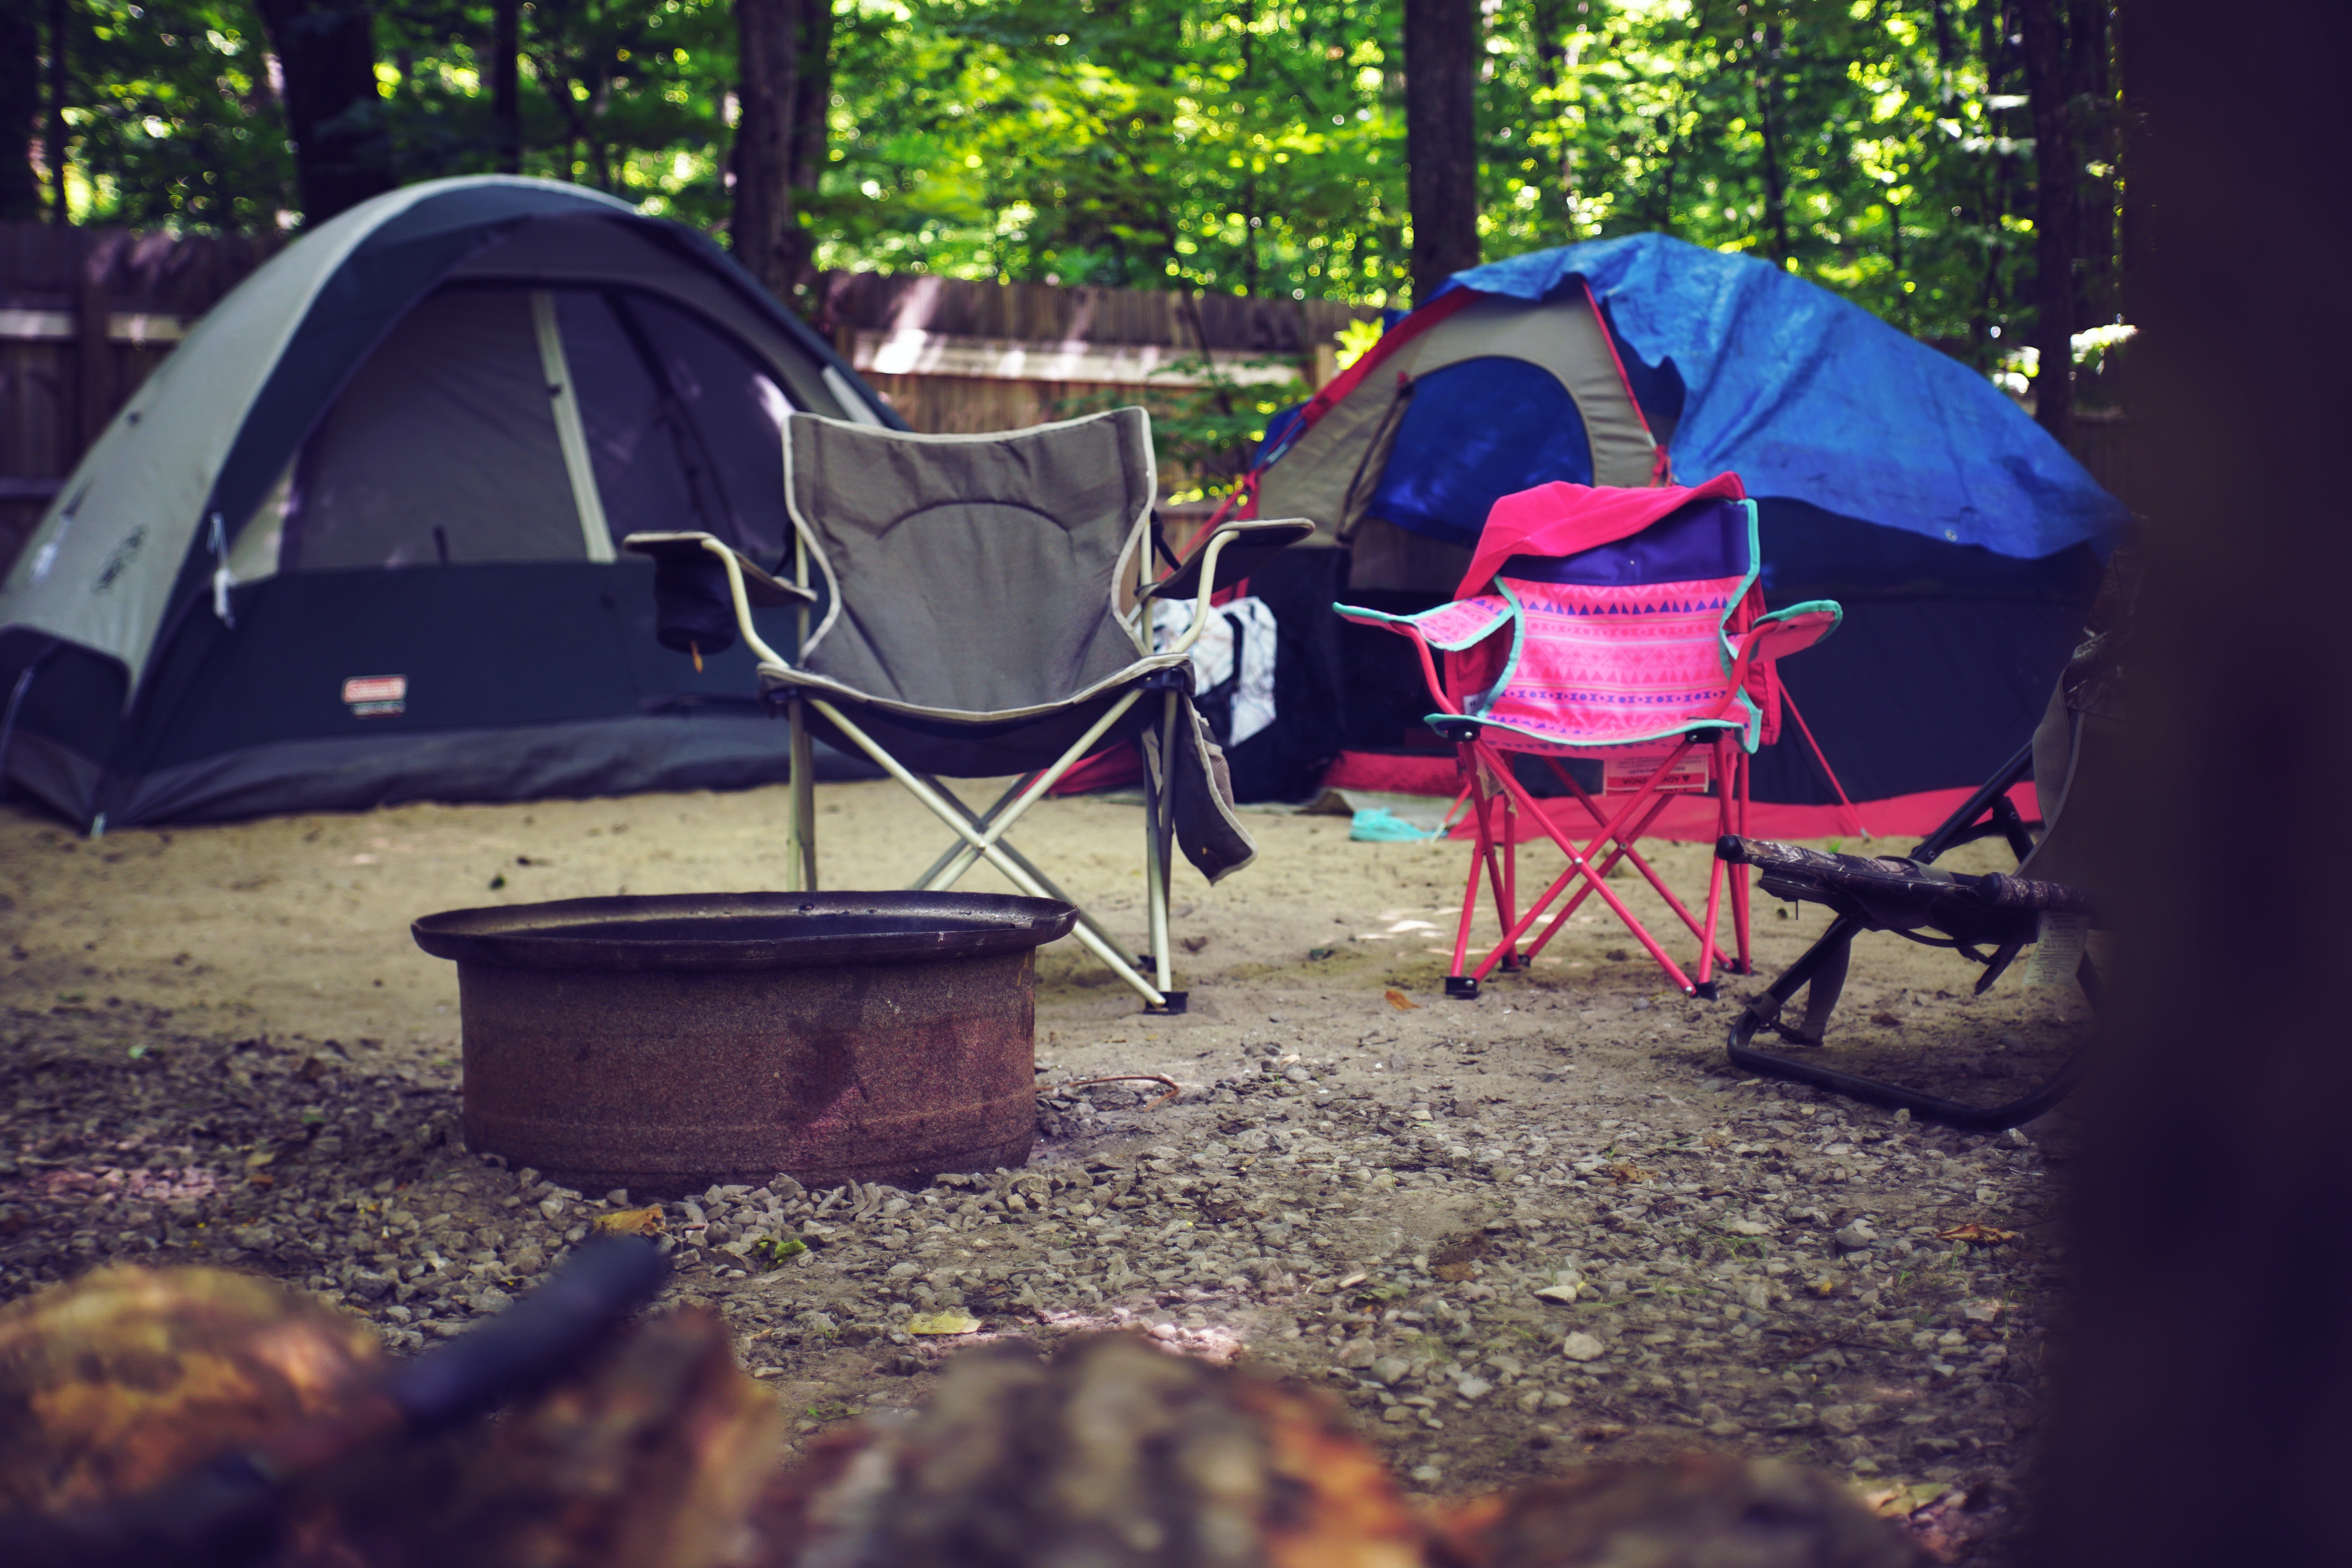 Ava and Mia were invited to a camping trip, but it led to a fatal accident. | Source: Pexels